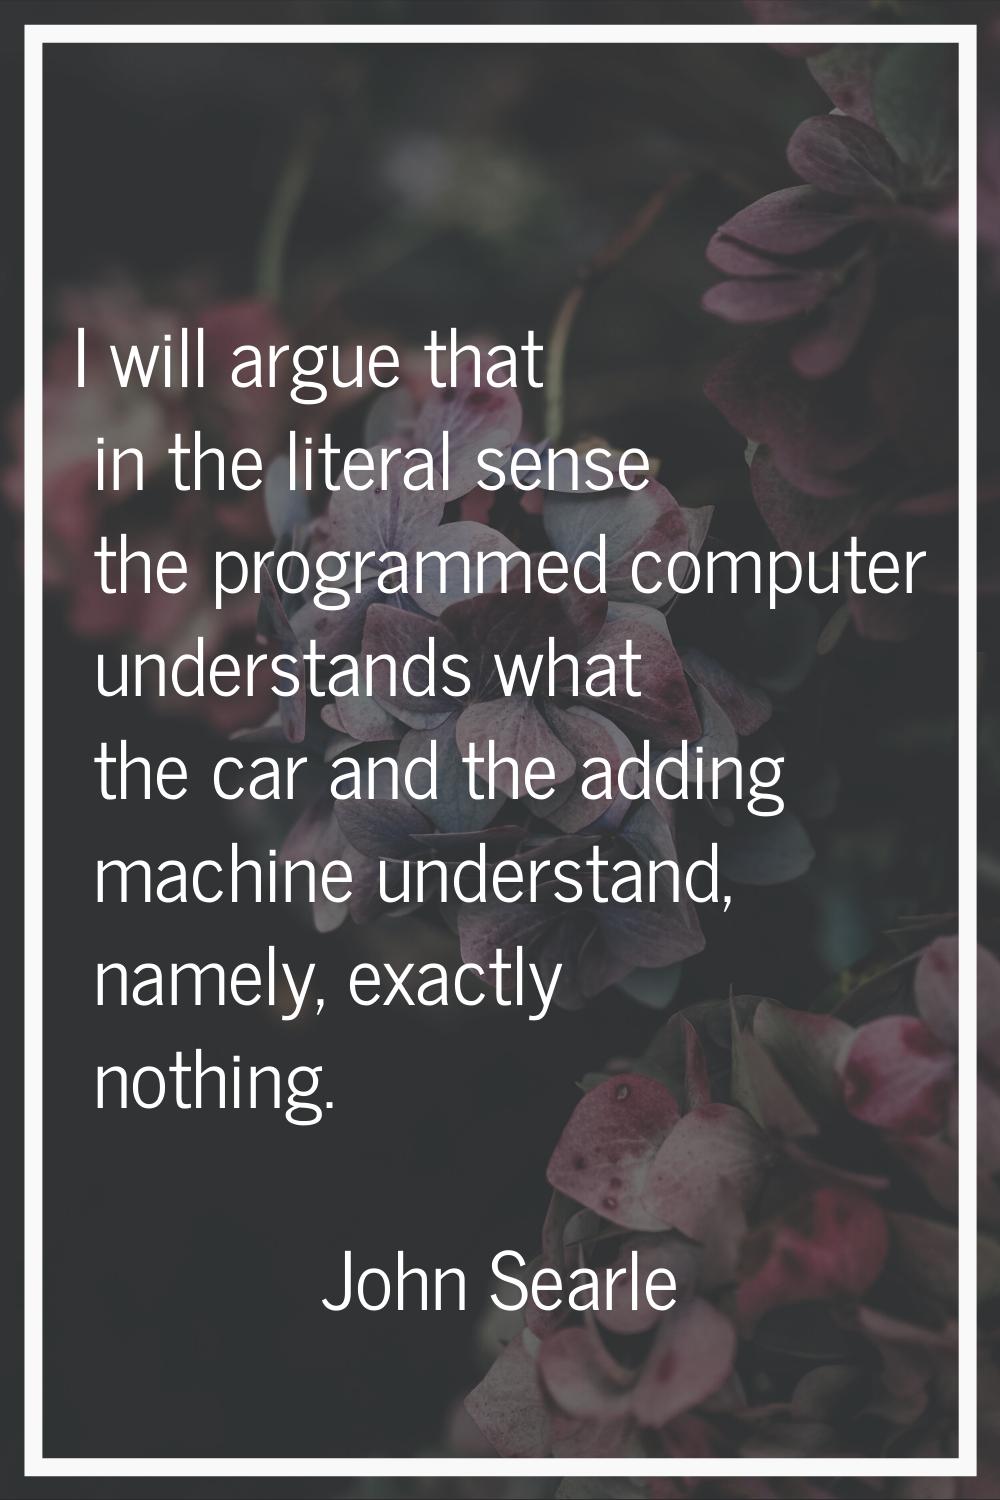 I will argue that in the literal sense the programmed computer understands what the car and the add